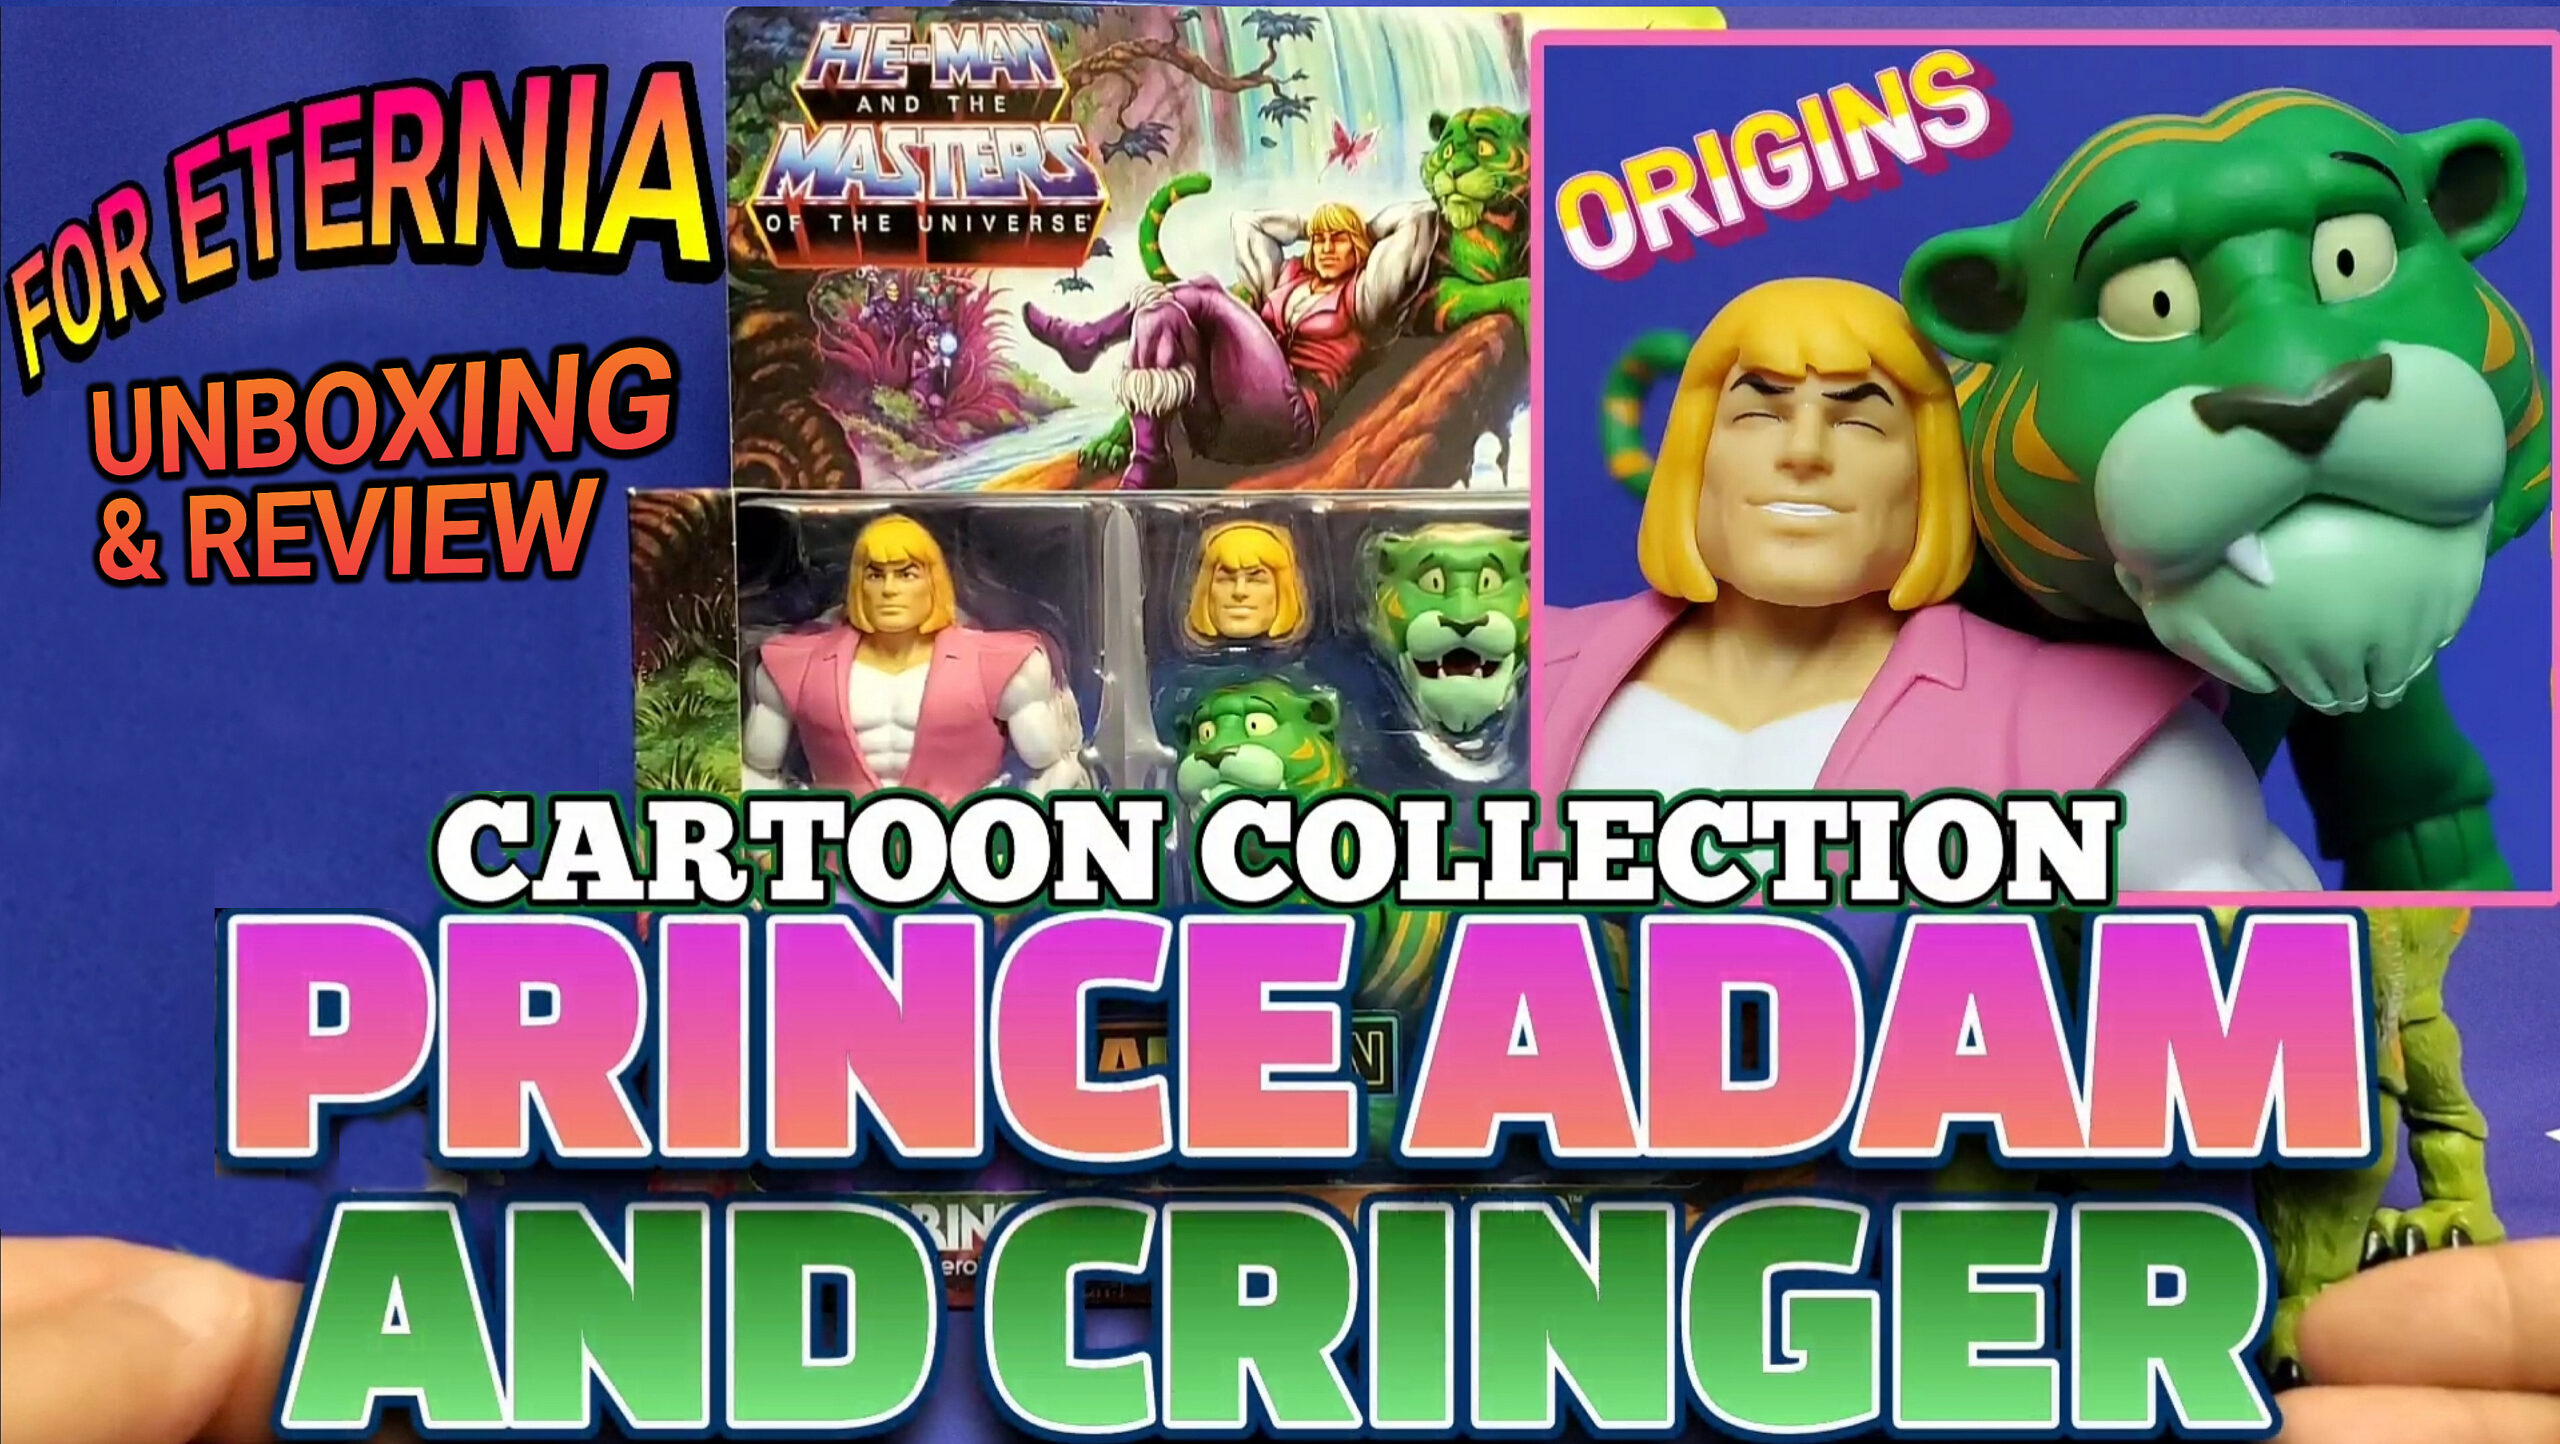 UNBOXING & REVIEW Origins ”Cartoon Collection” PRINCE ADAM and CRINGER He-Man and the Masters of the Universe Figures